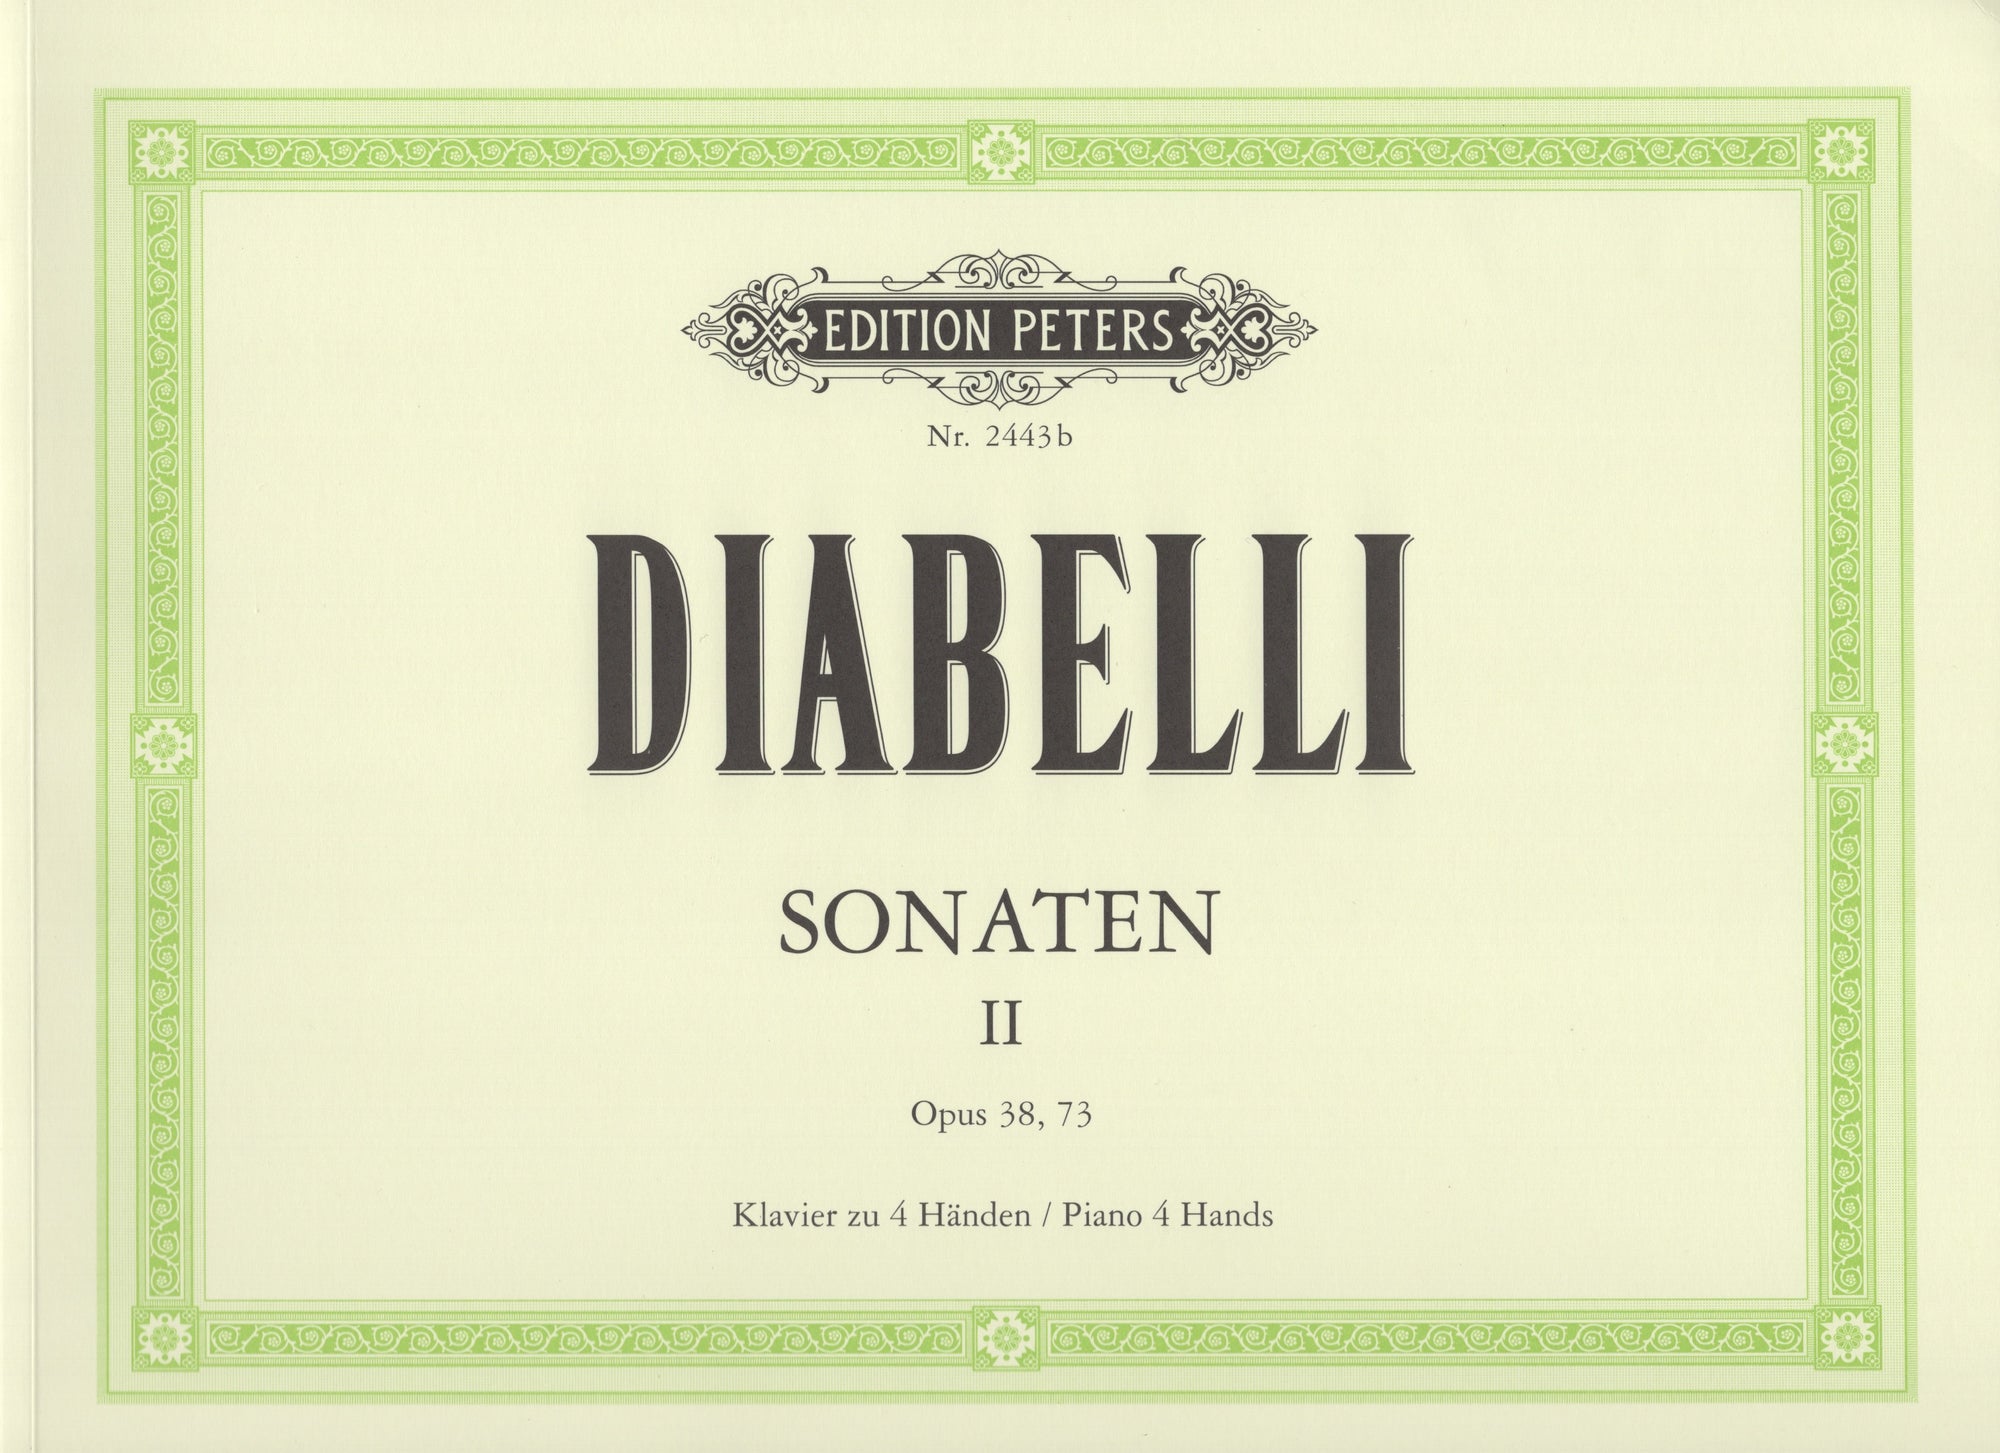 Diabelli: Sonatas for Piano 4-Hands - Volume 2 (Opp. 38 and 73)